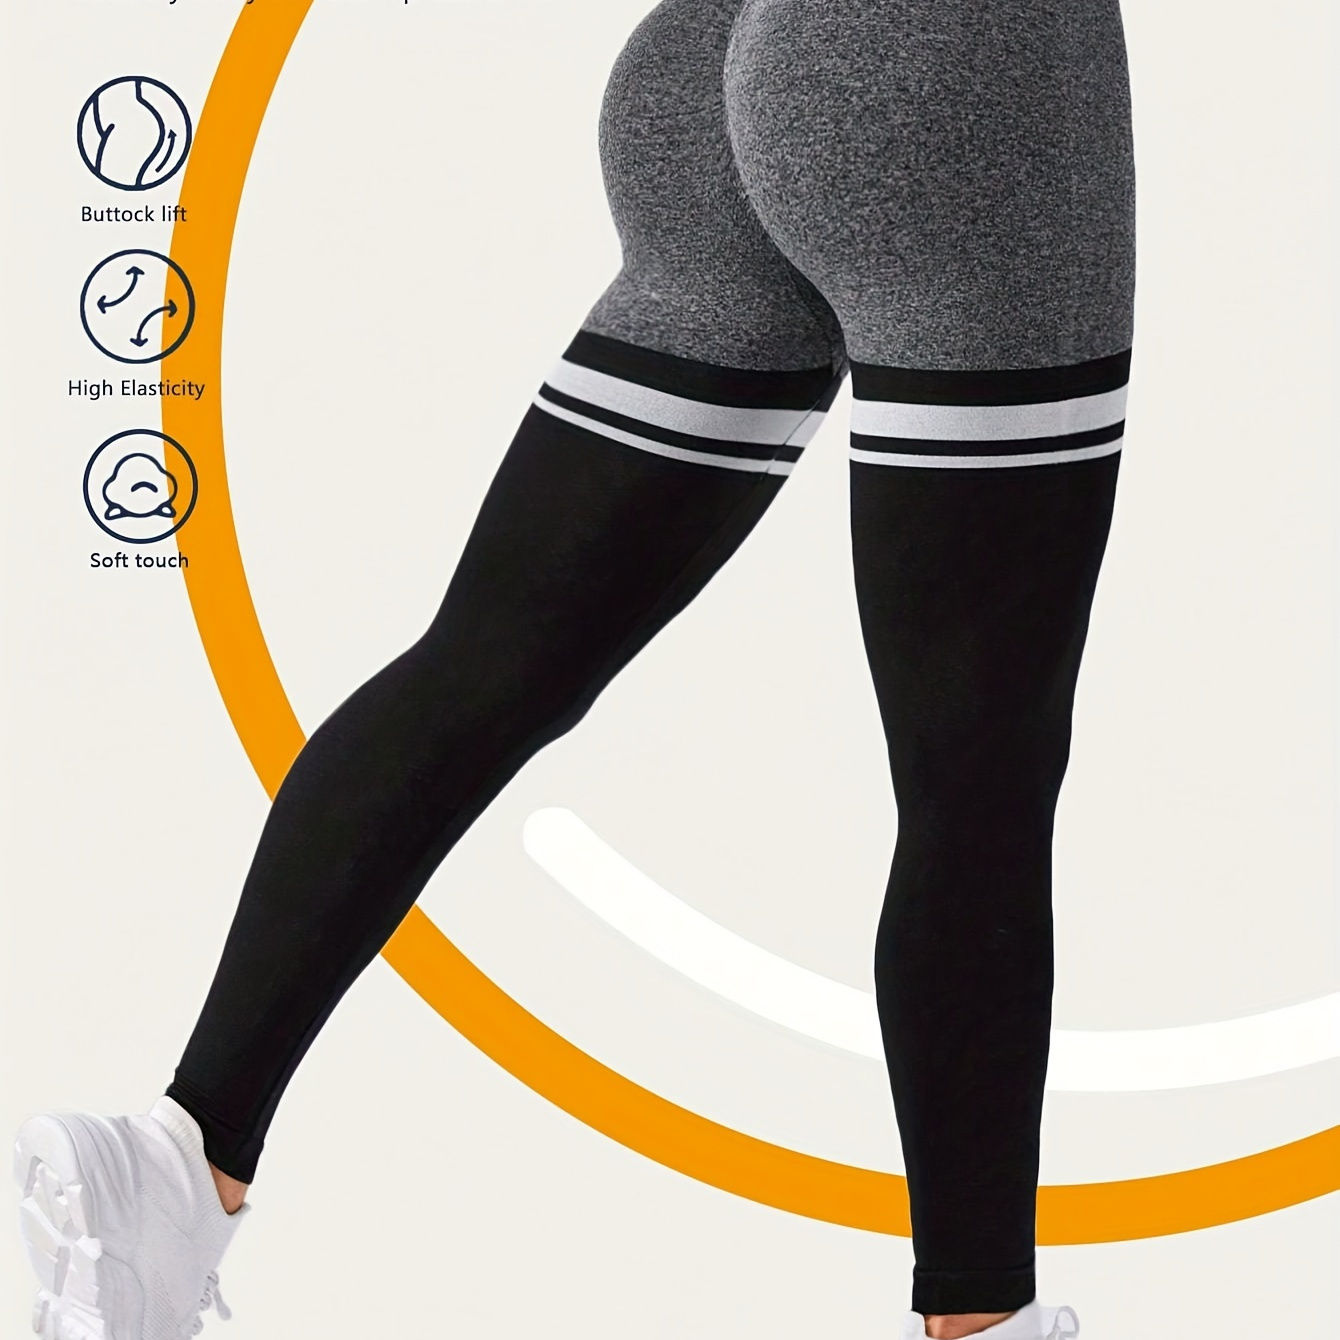 

Women's Seamless High Elasticity Sports Yoga Leggings, Athletic Activewear Tights With Compression Fit & Stylish Contrast Stripes For Workout, Gym